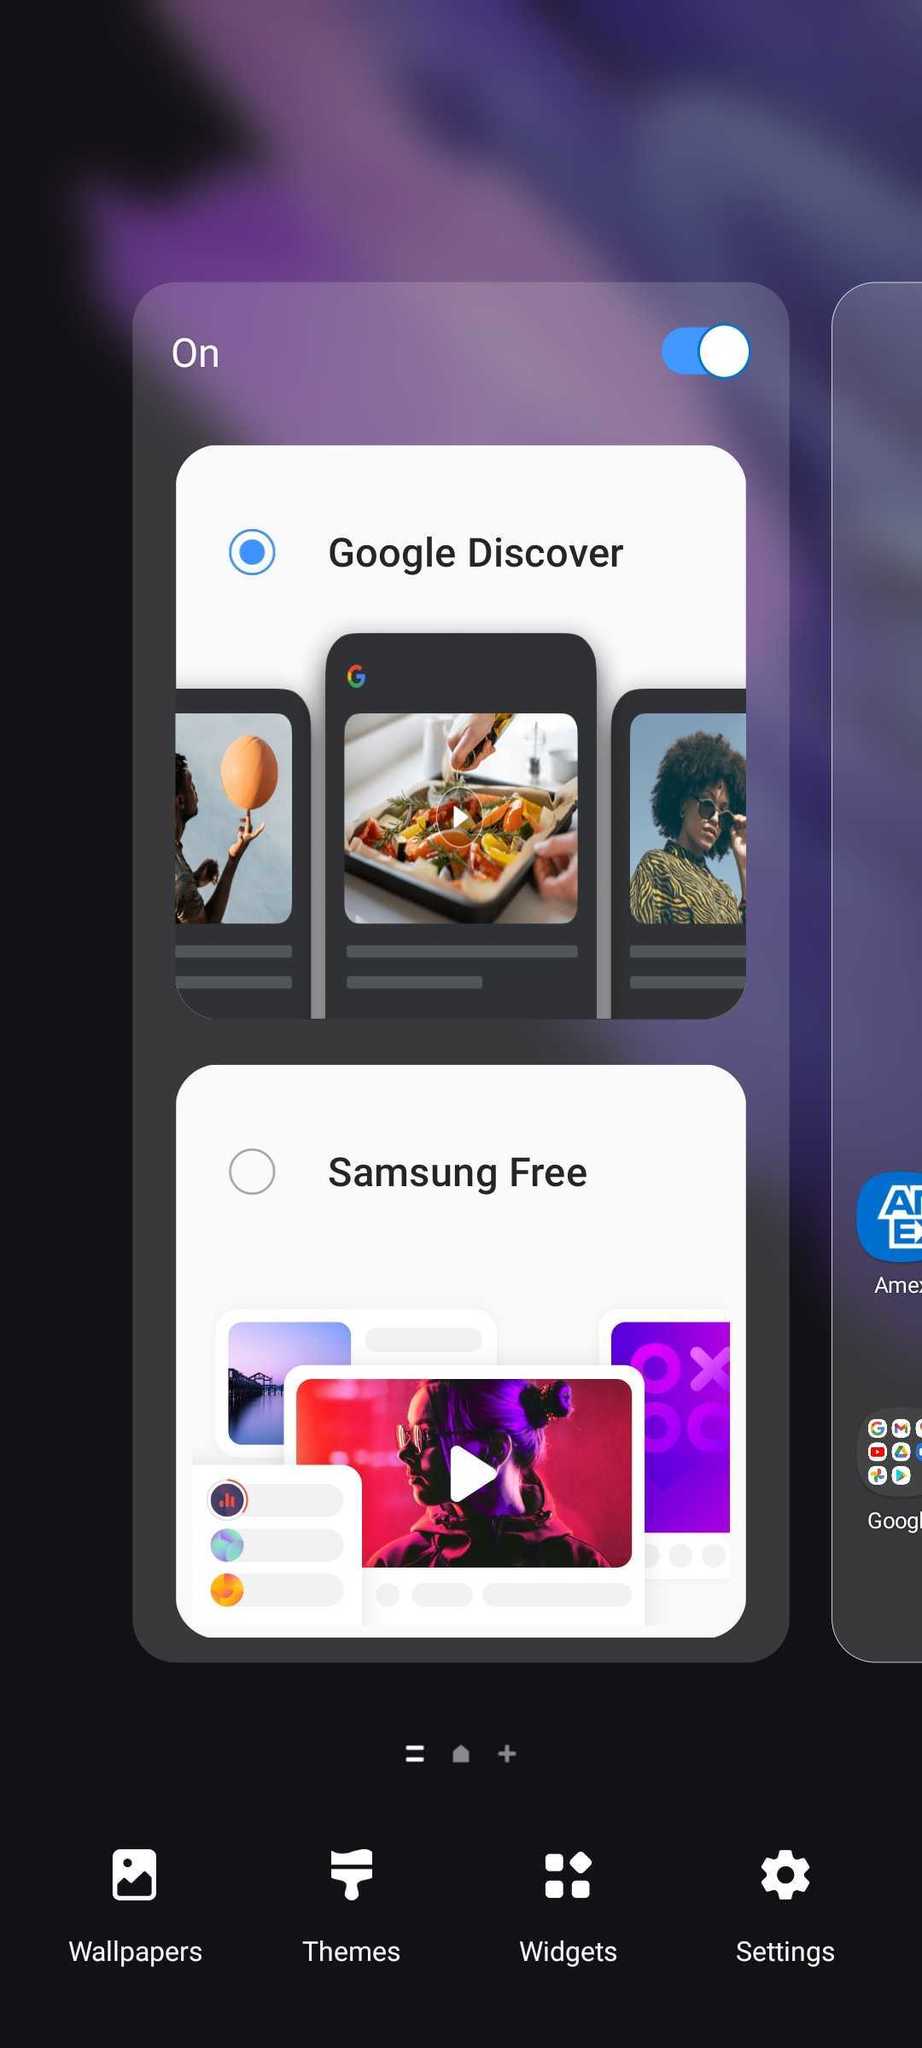 Samsung Free Google Discover How To Switch Step 3